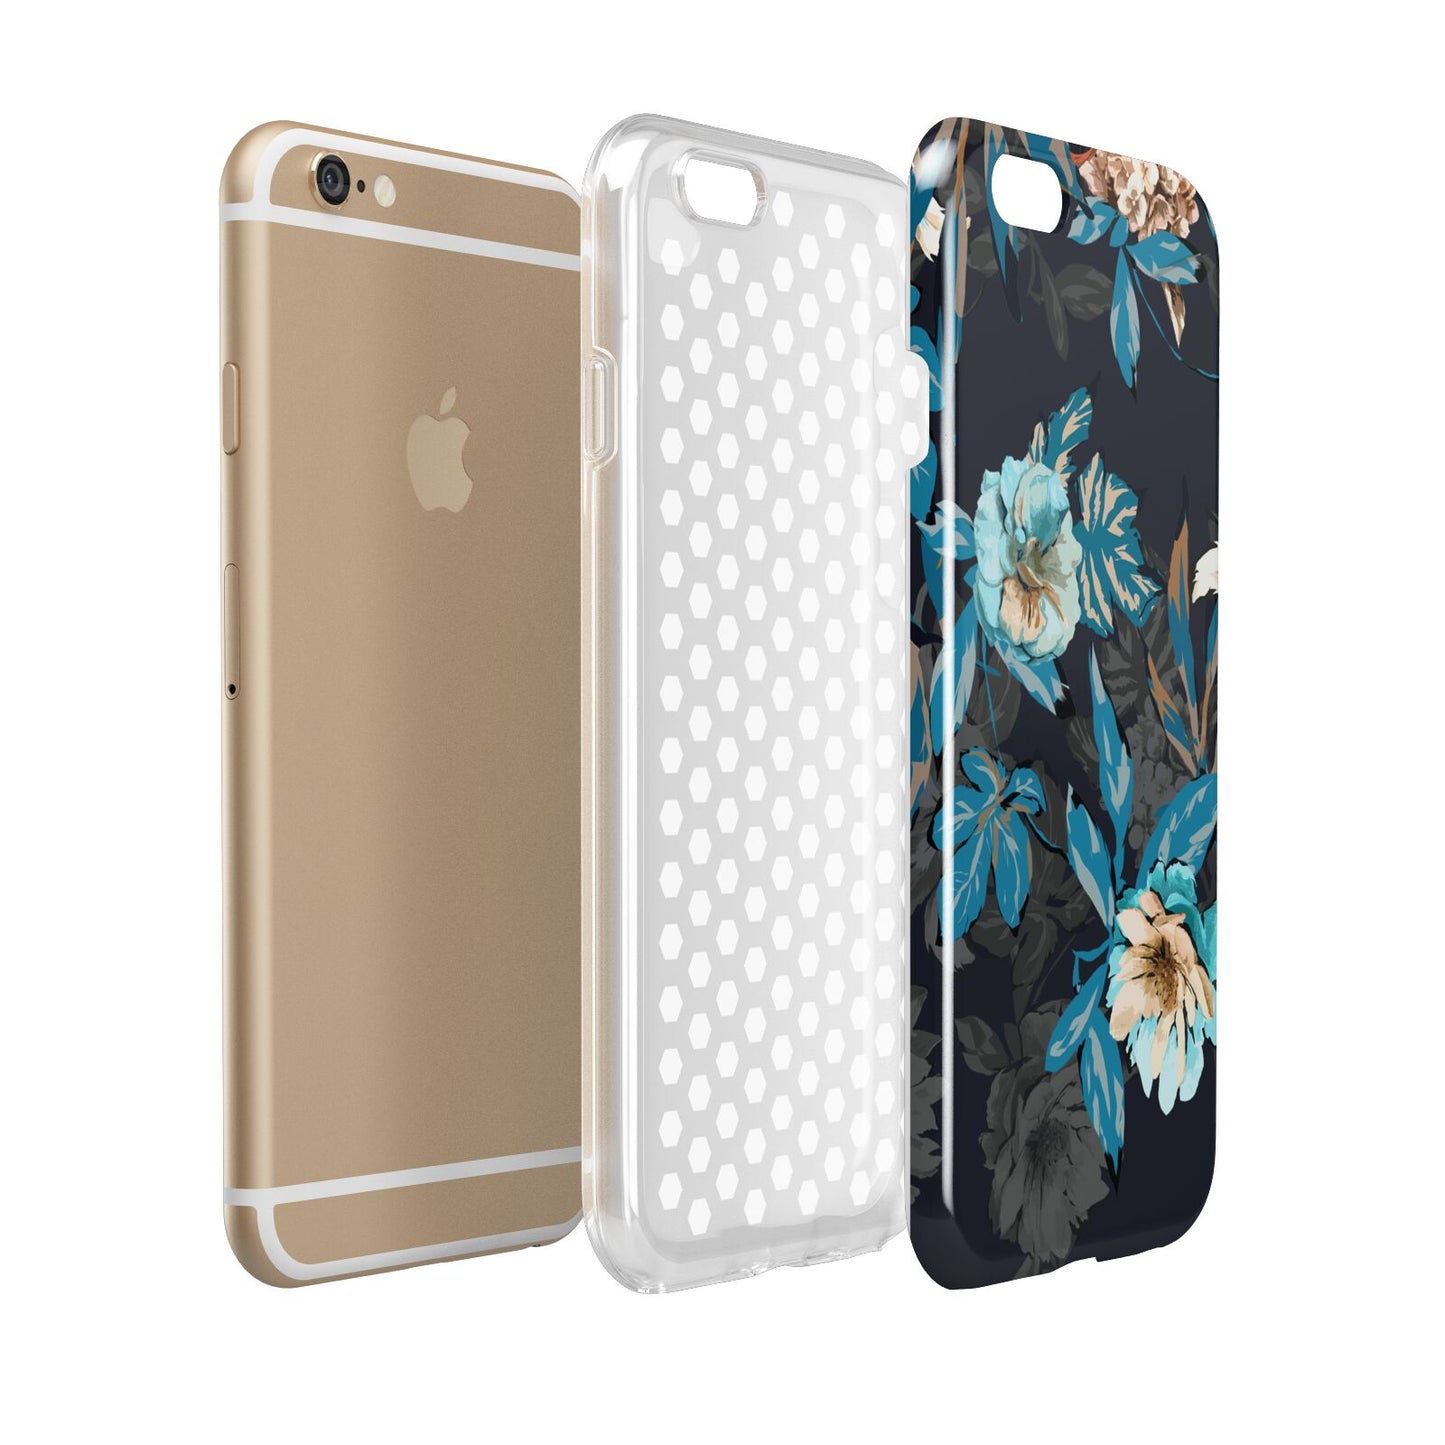 Blossom Flowers Apple iPhone 6 3D Tough Case Expanded view